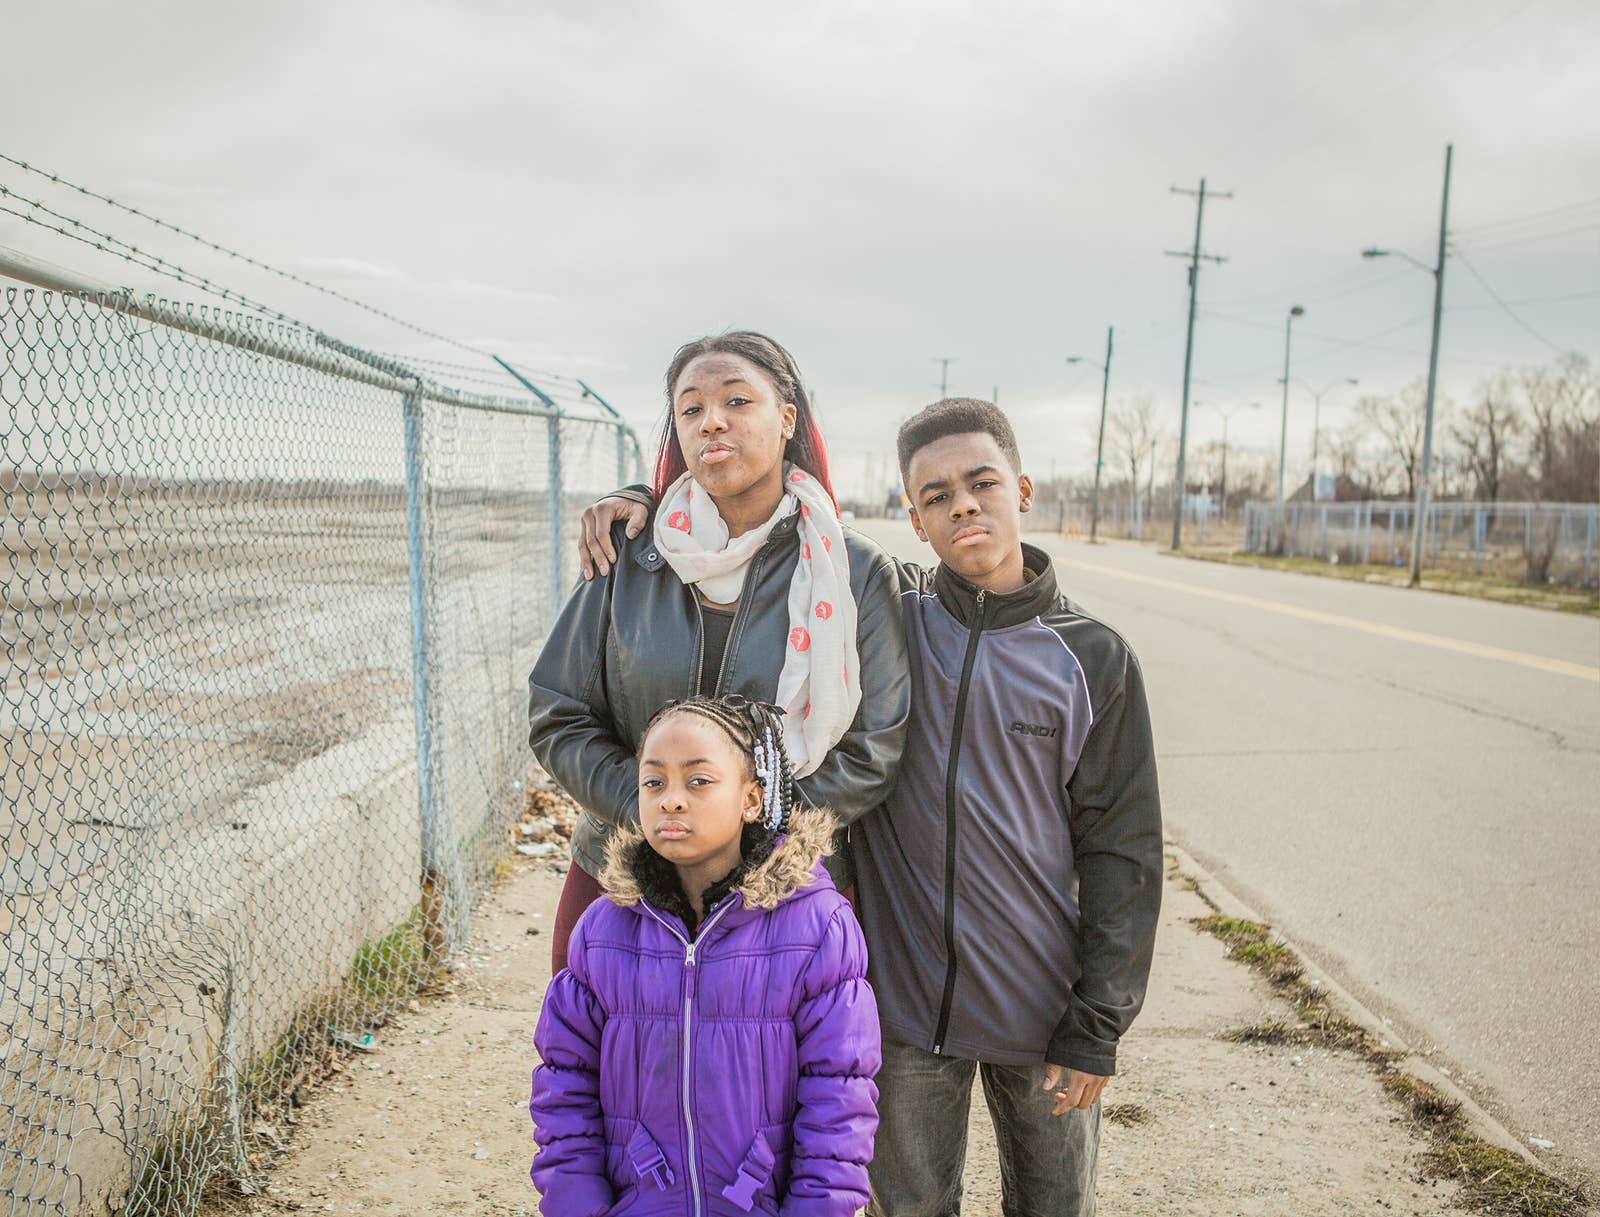 Three young people in coats on a sidewalk in Flint Michigan with a barbed wire fence